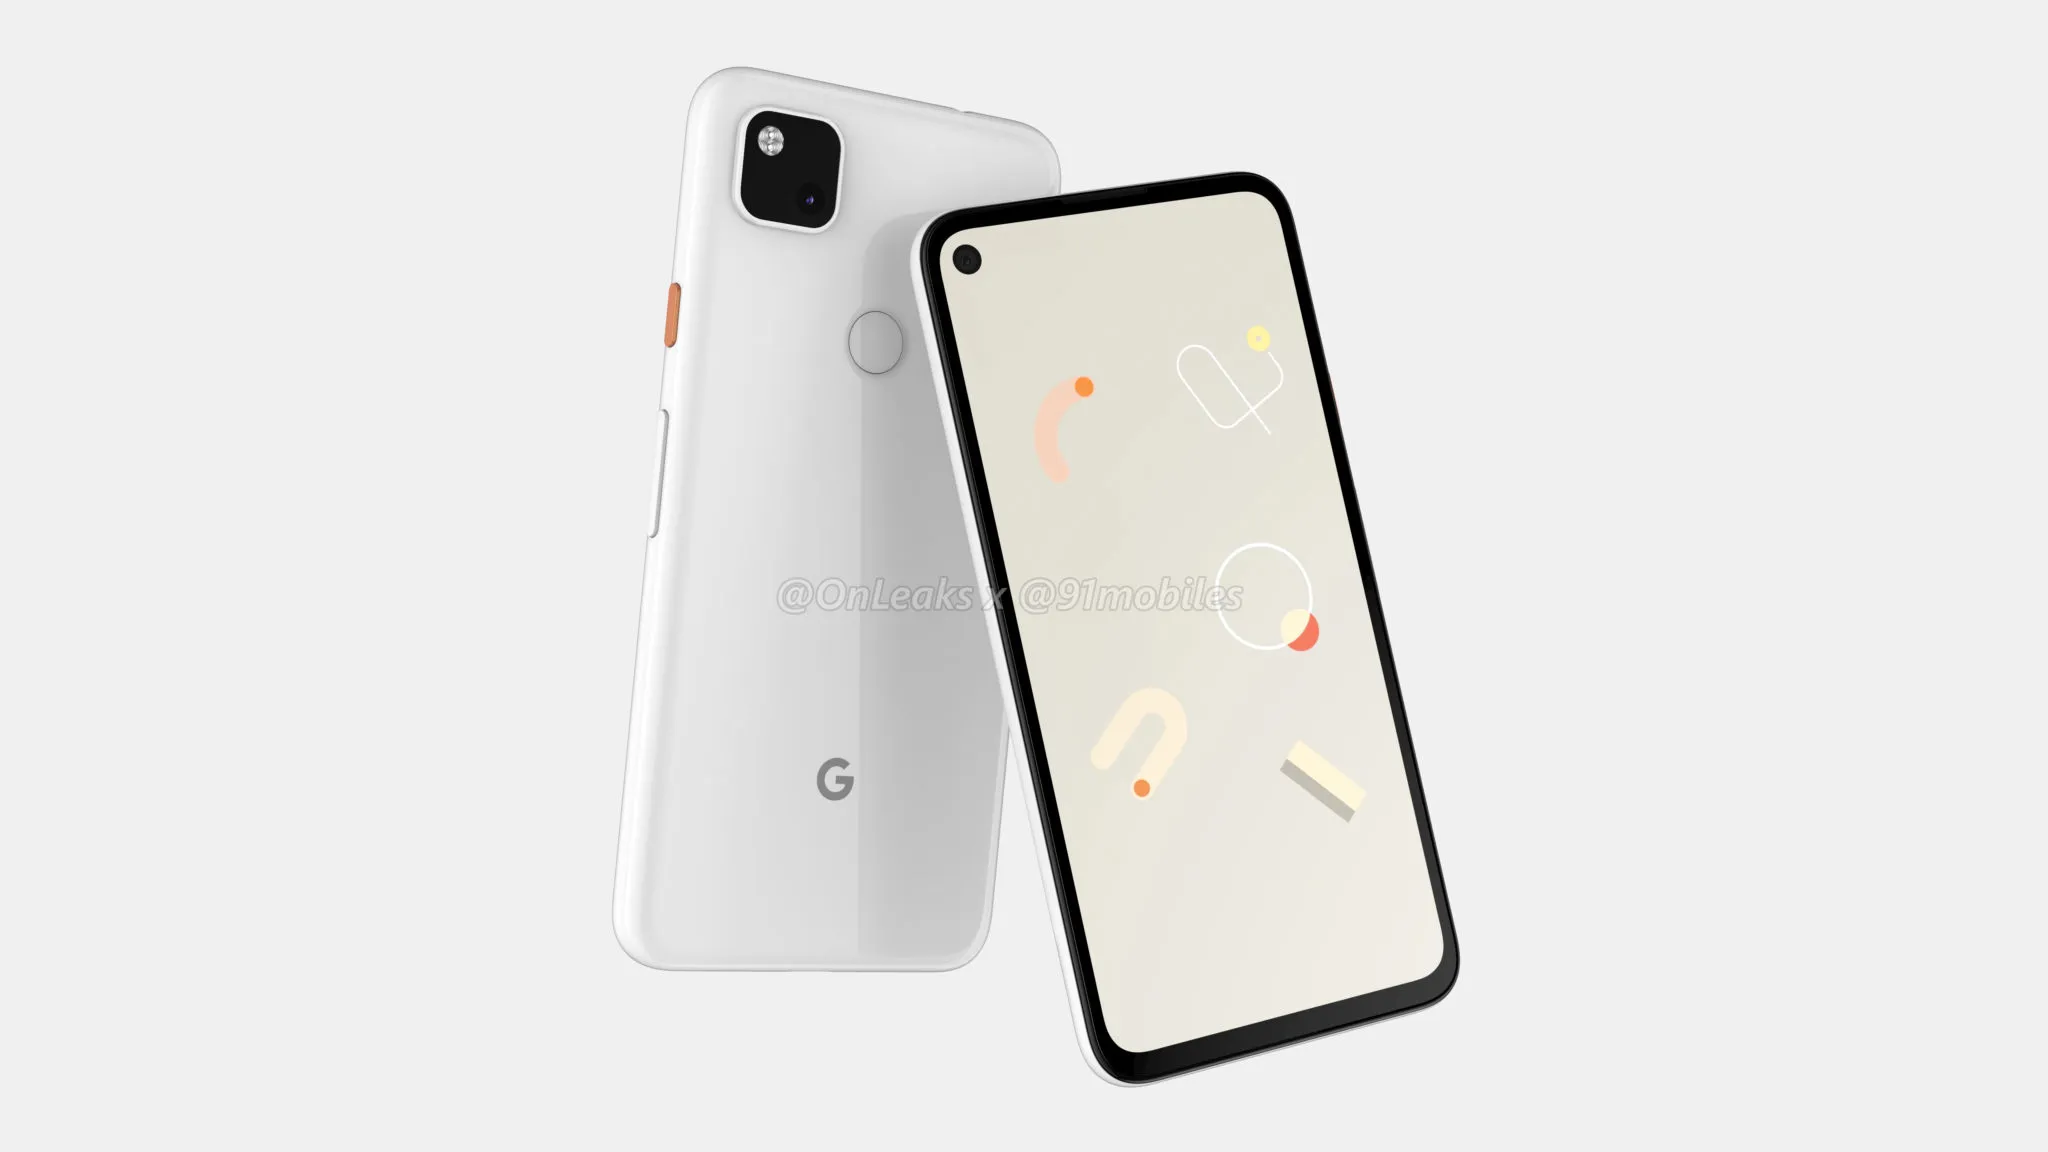 Google Pixel 4a Smartphone Review in Hindi and Price in India Specification Features Camera Procceser RAM Storage यह स्मार्टफोन iPhone SE 2020 को देगा टक्कर